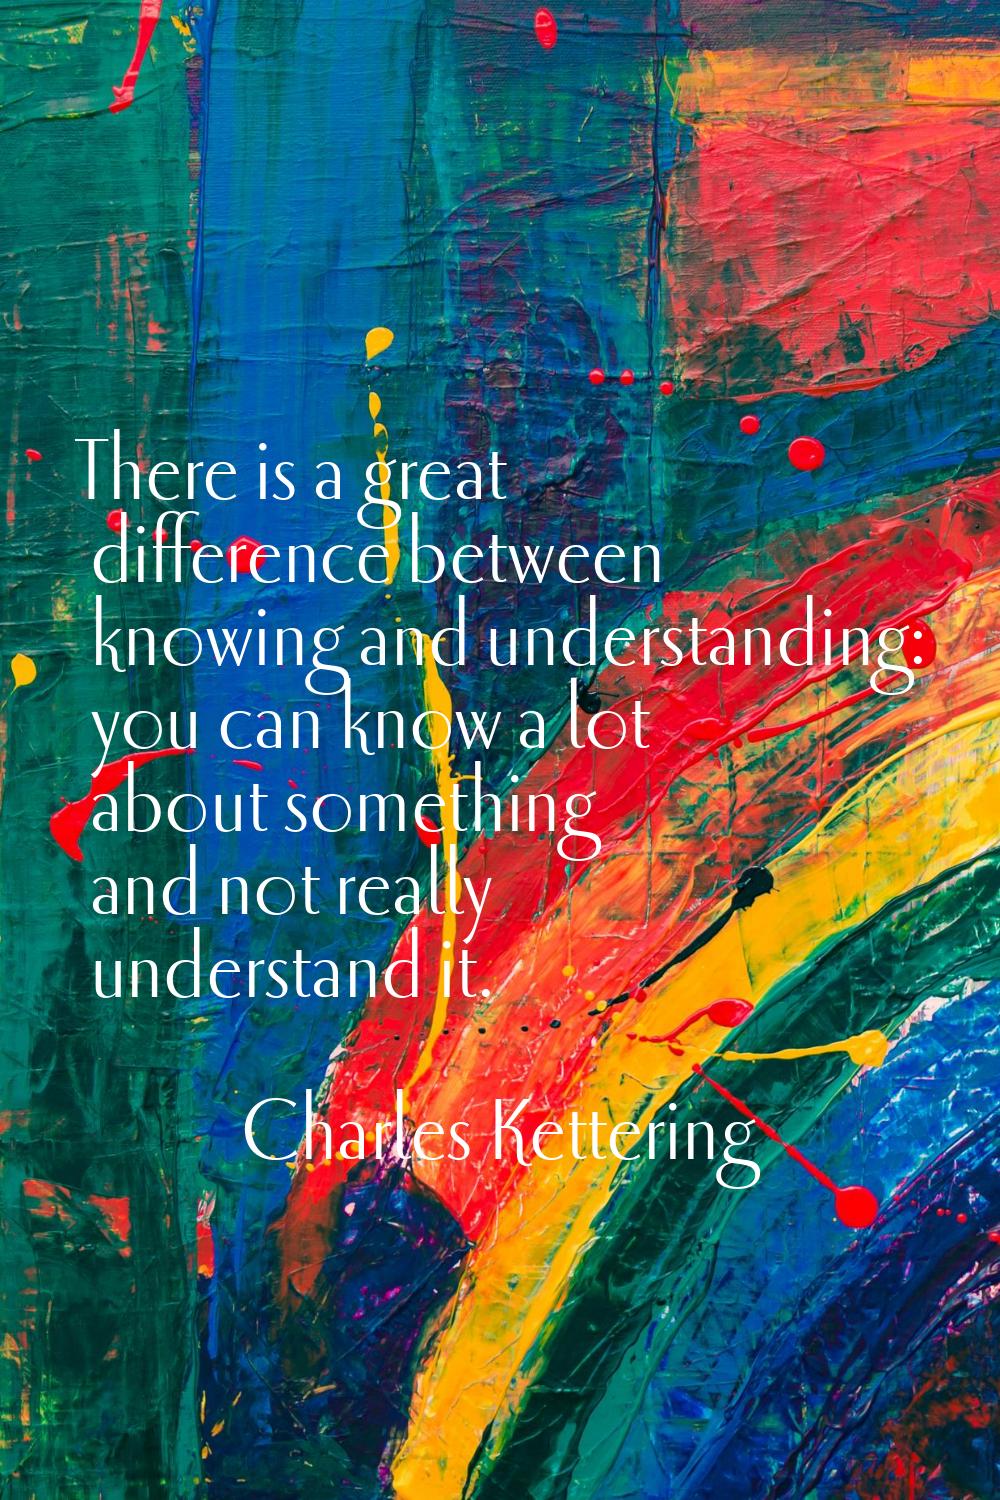 There is a great difference between knowing and understanding: you can know a lot about something a